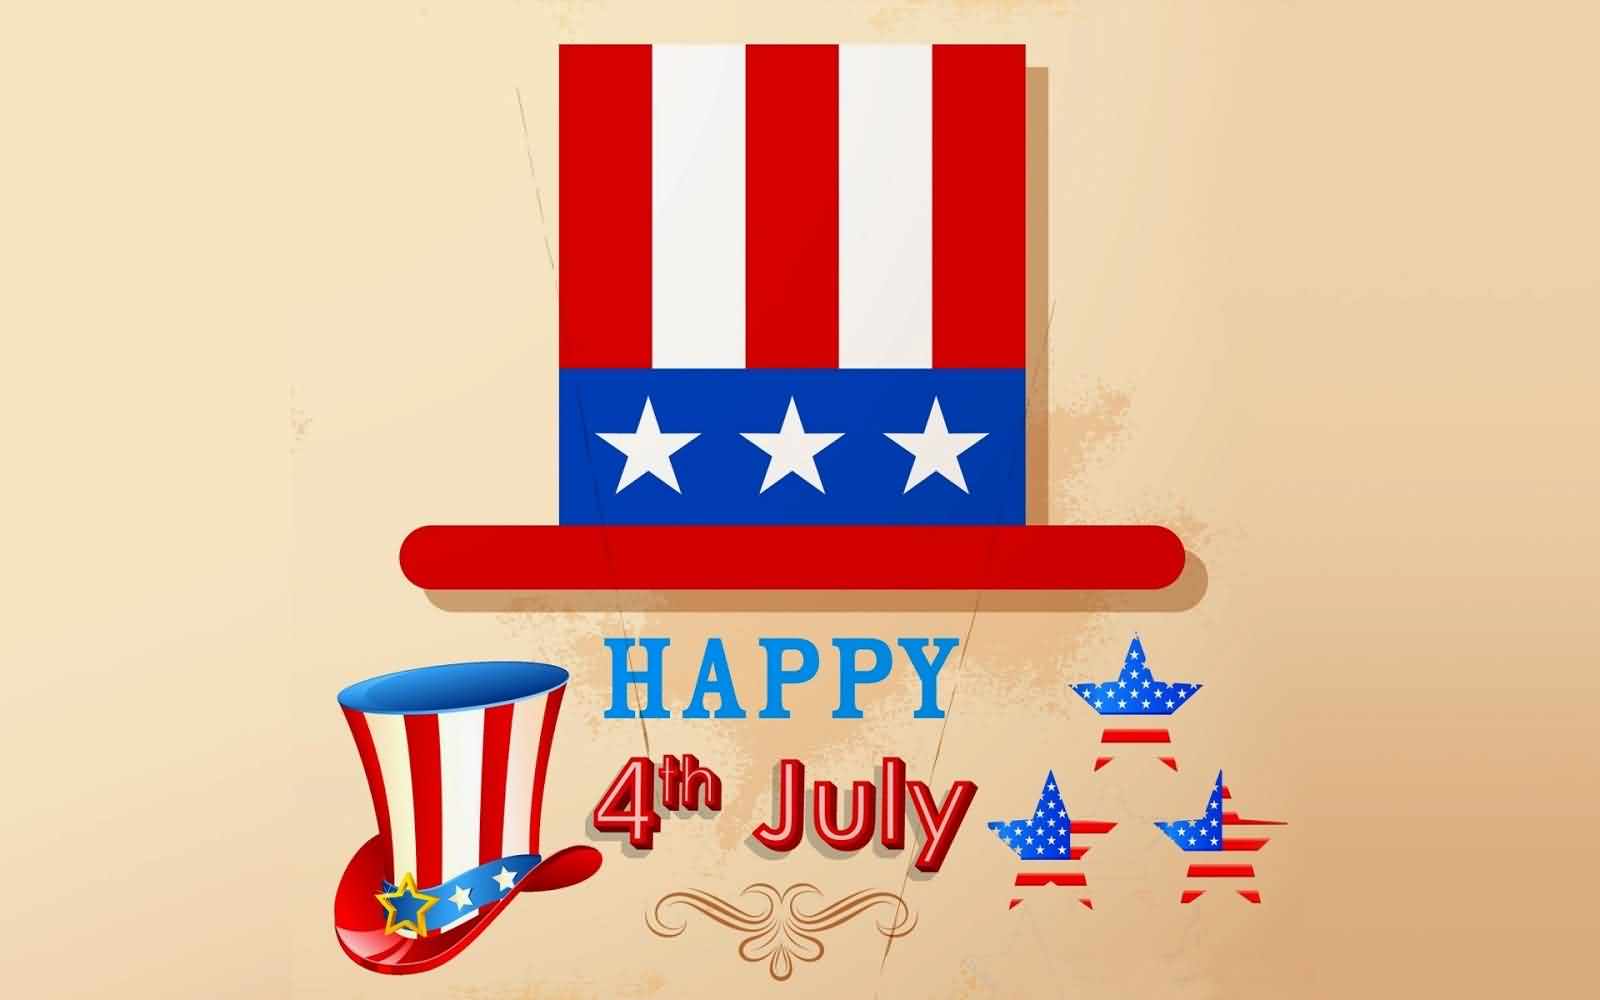 Happy 4th July Greetings Message Wishes Wallpaper